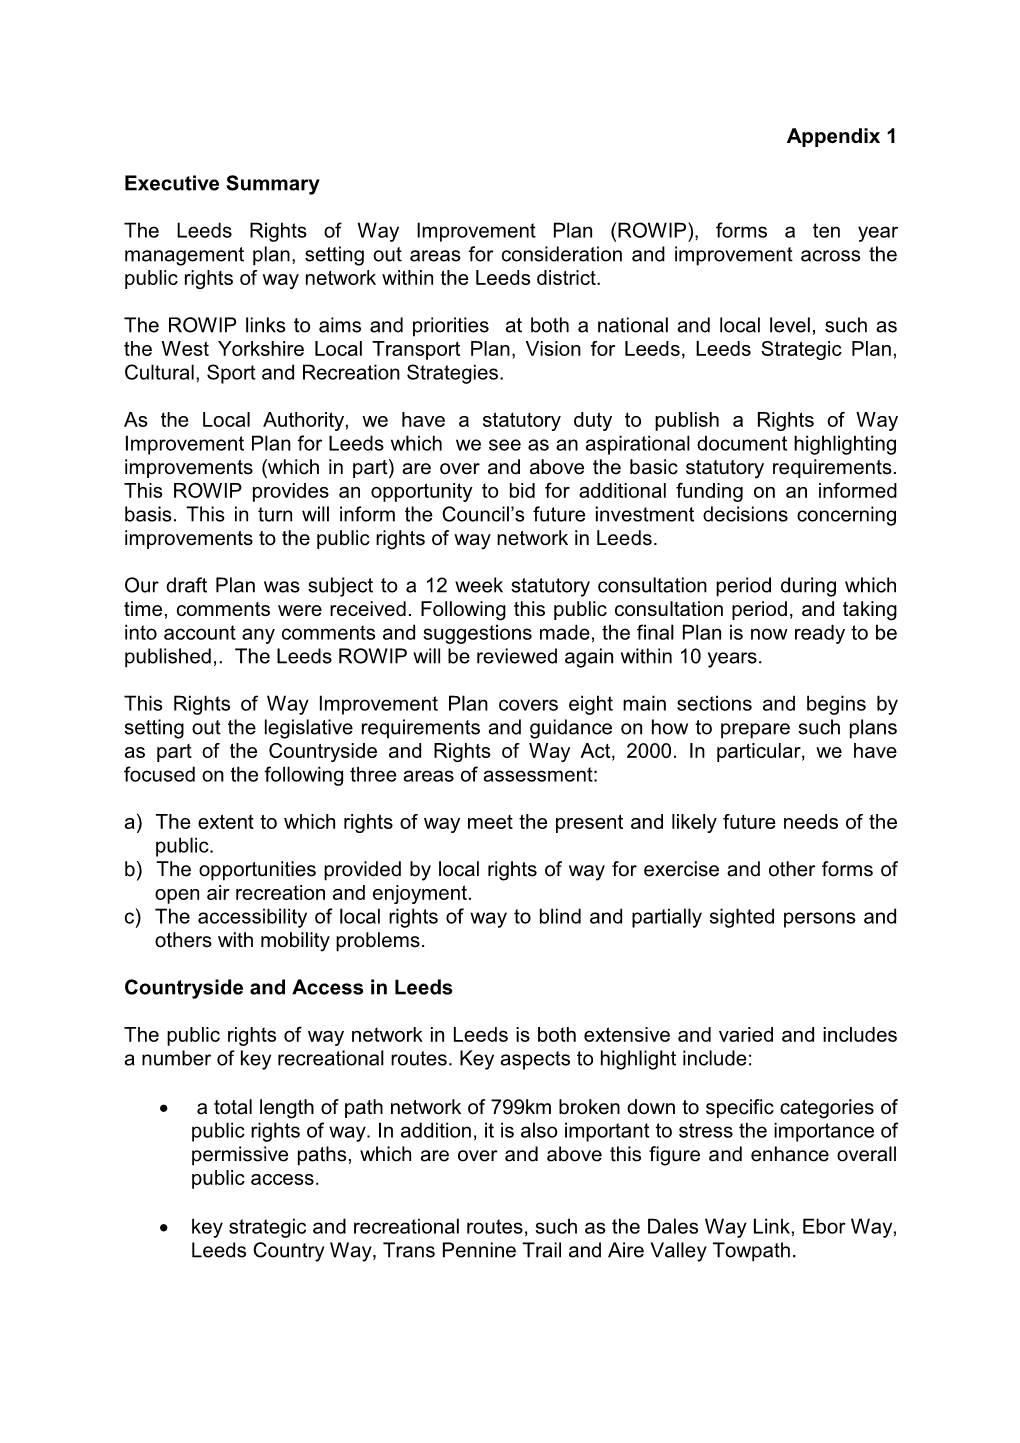 Appendix 1 Executive Summary the Leeds Rights